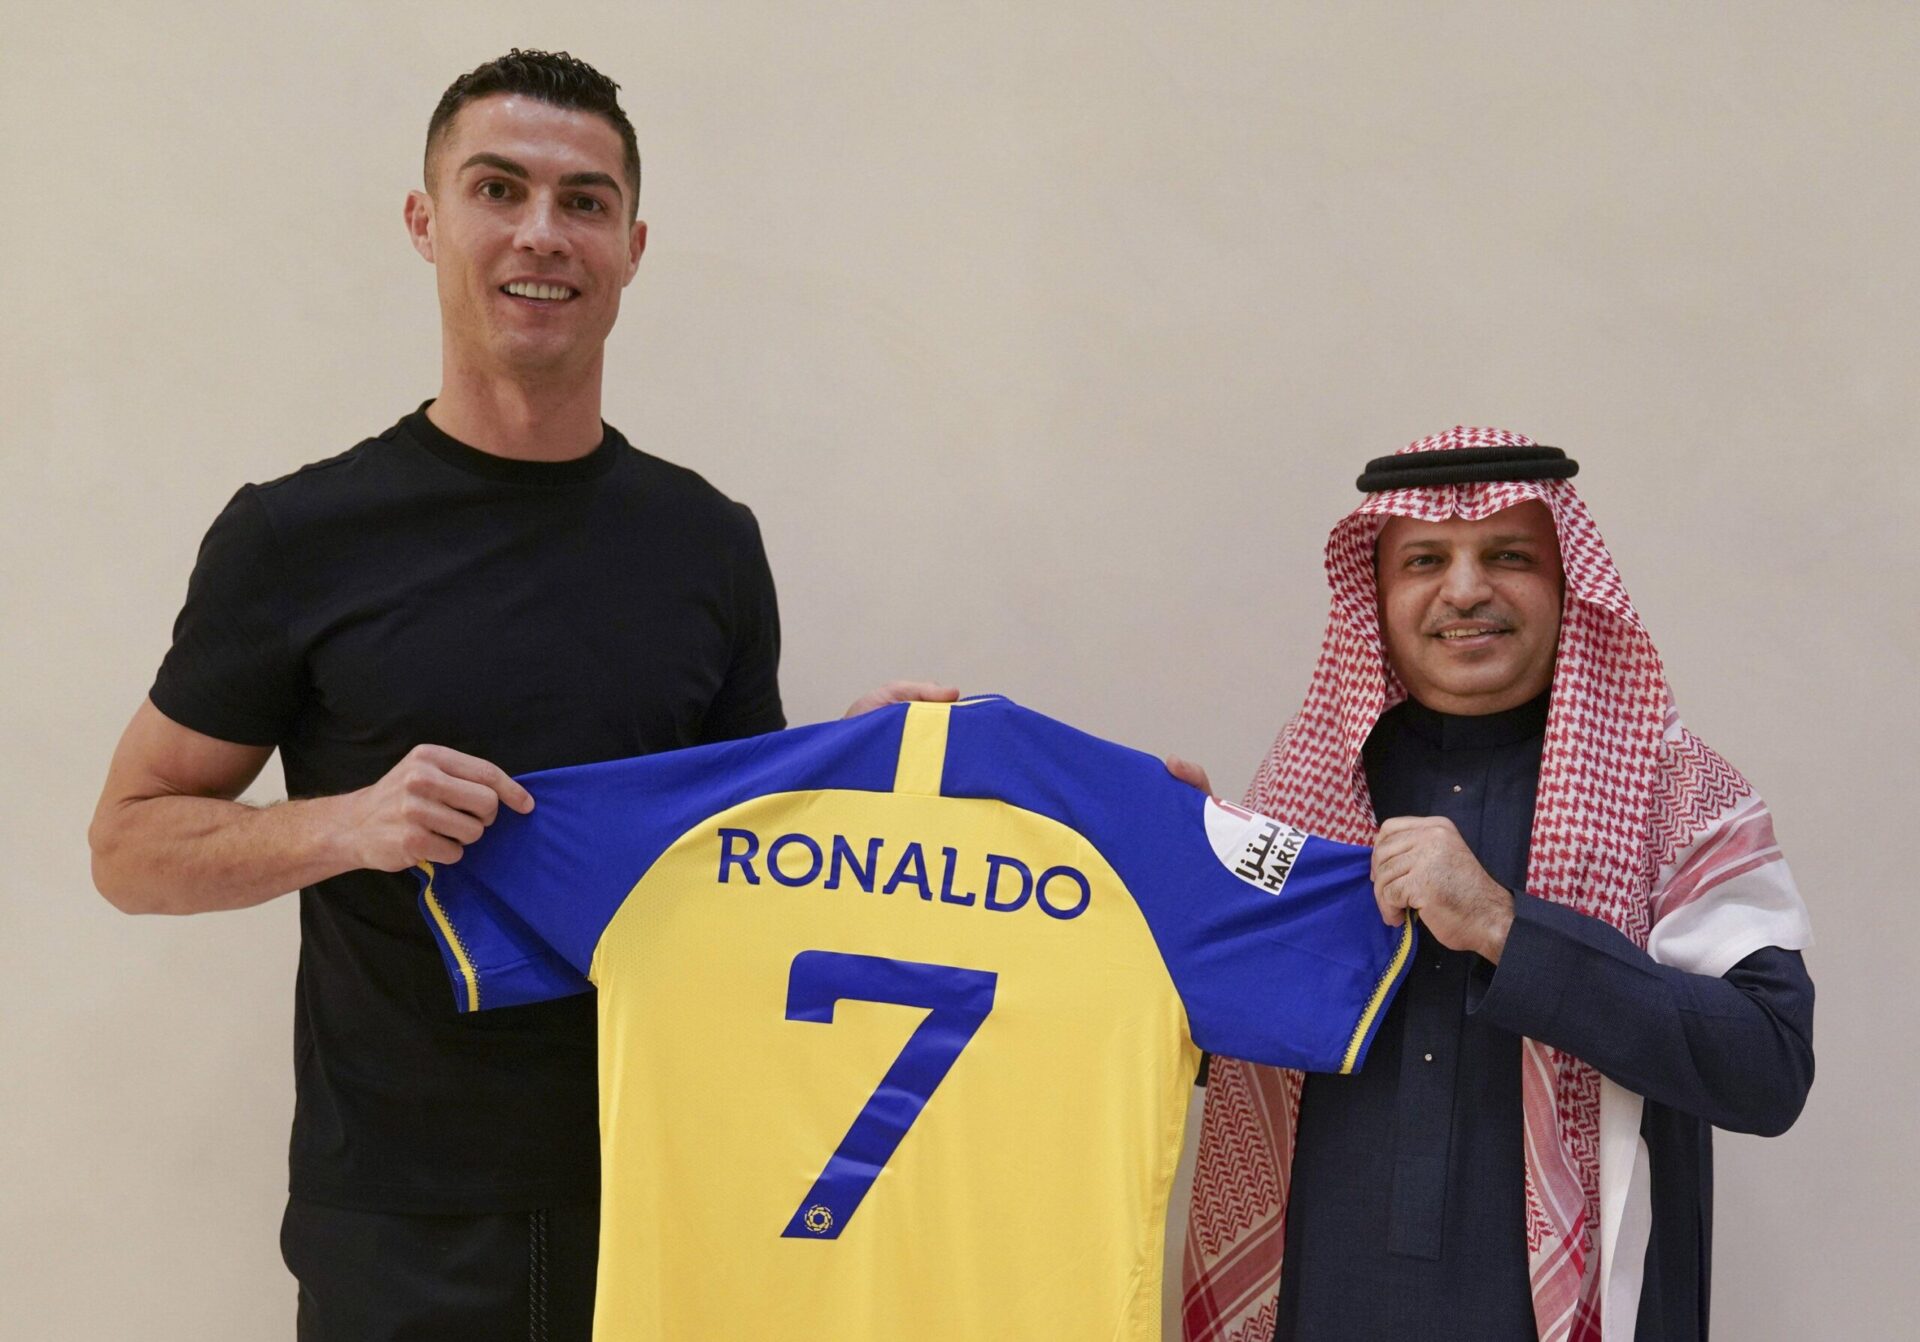 Cristiano Ronaldo's Al-Nassr contract includes a clause that would allow him to move to Newcastle if the club made the Champions League.